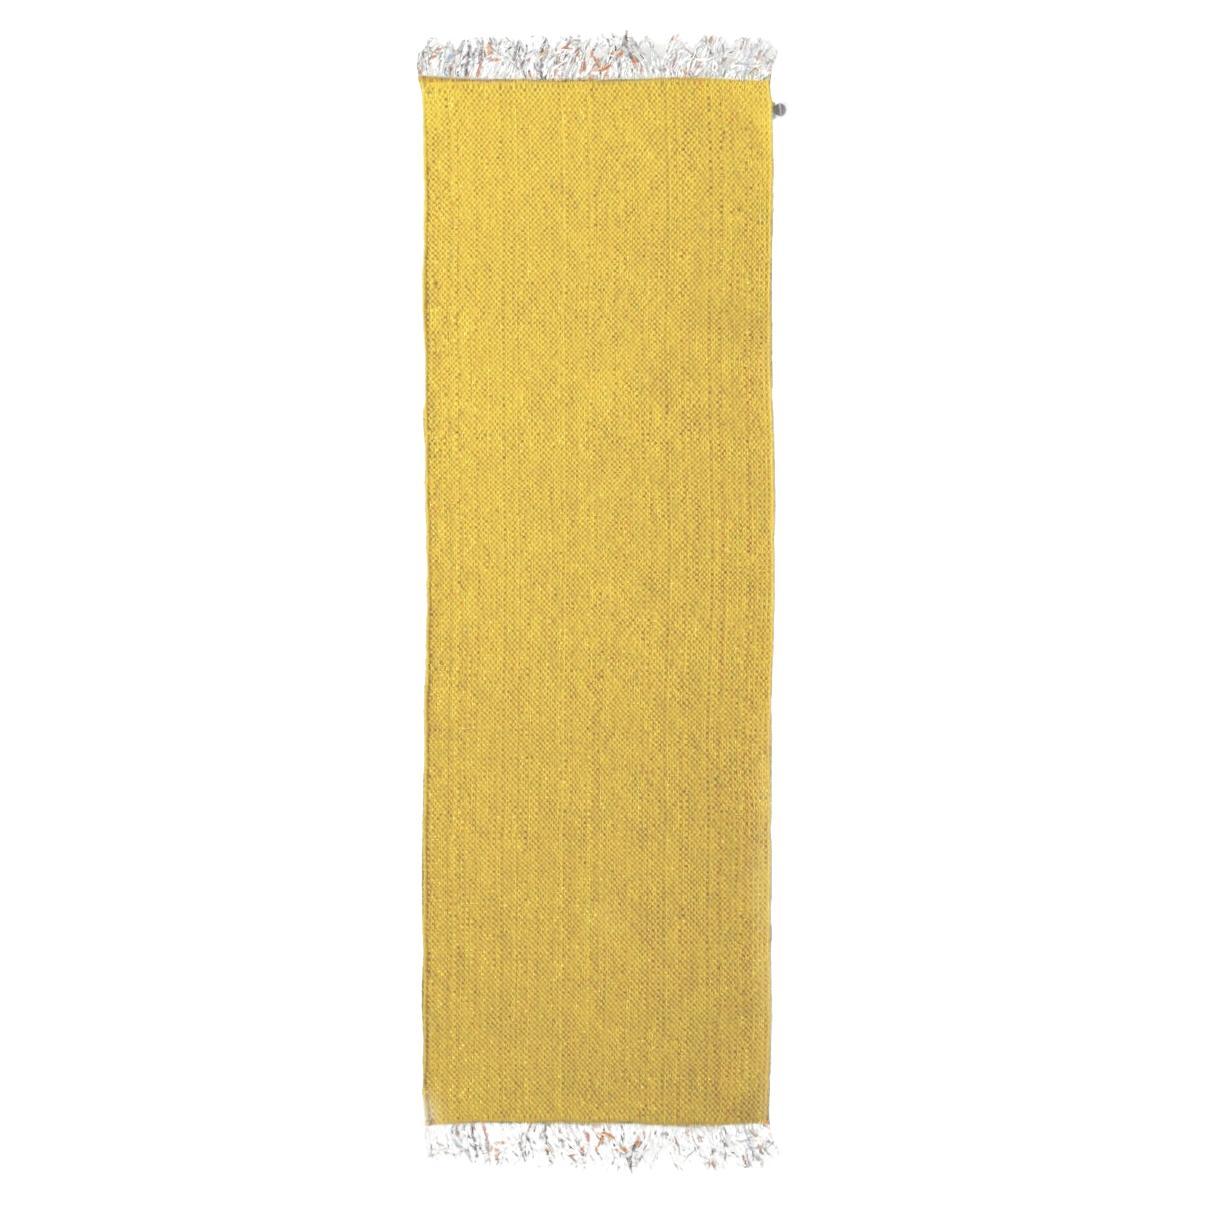 Candy Wrapper Rug_Runner_yellow / Unique Award Winning Woven Rug by Jutta Werner